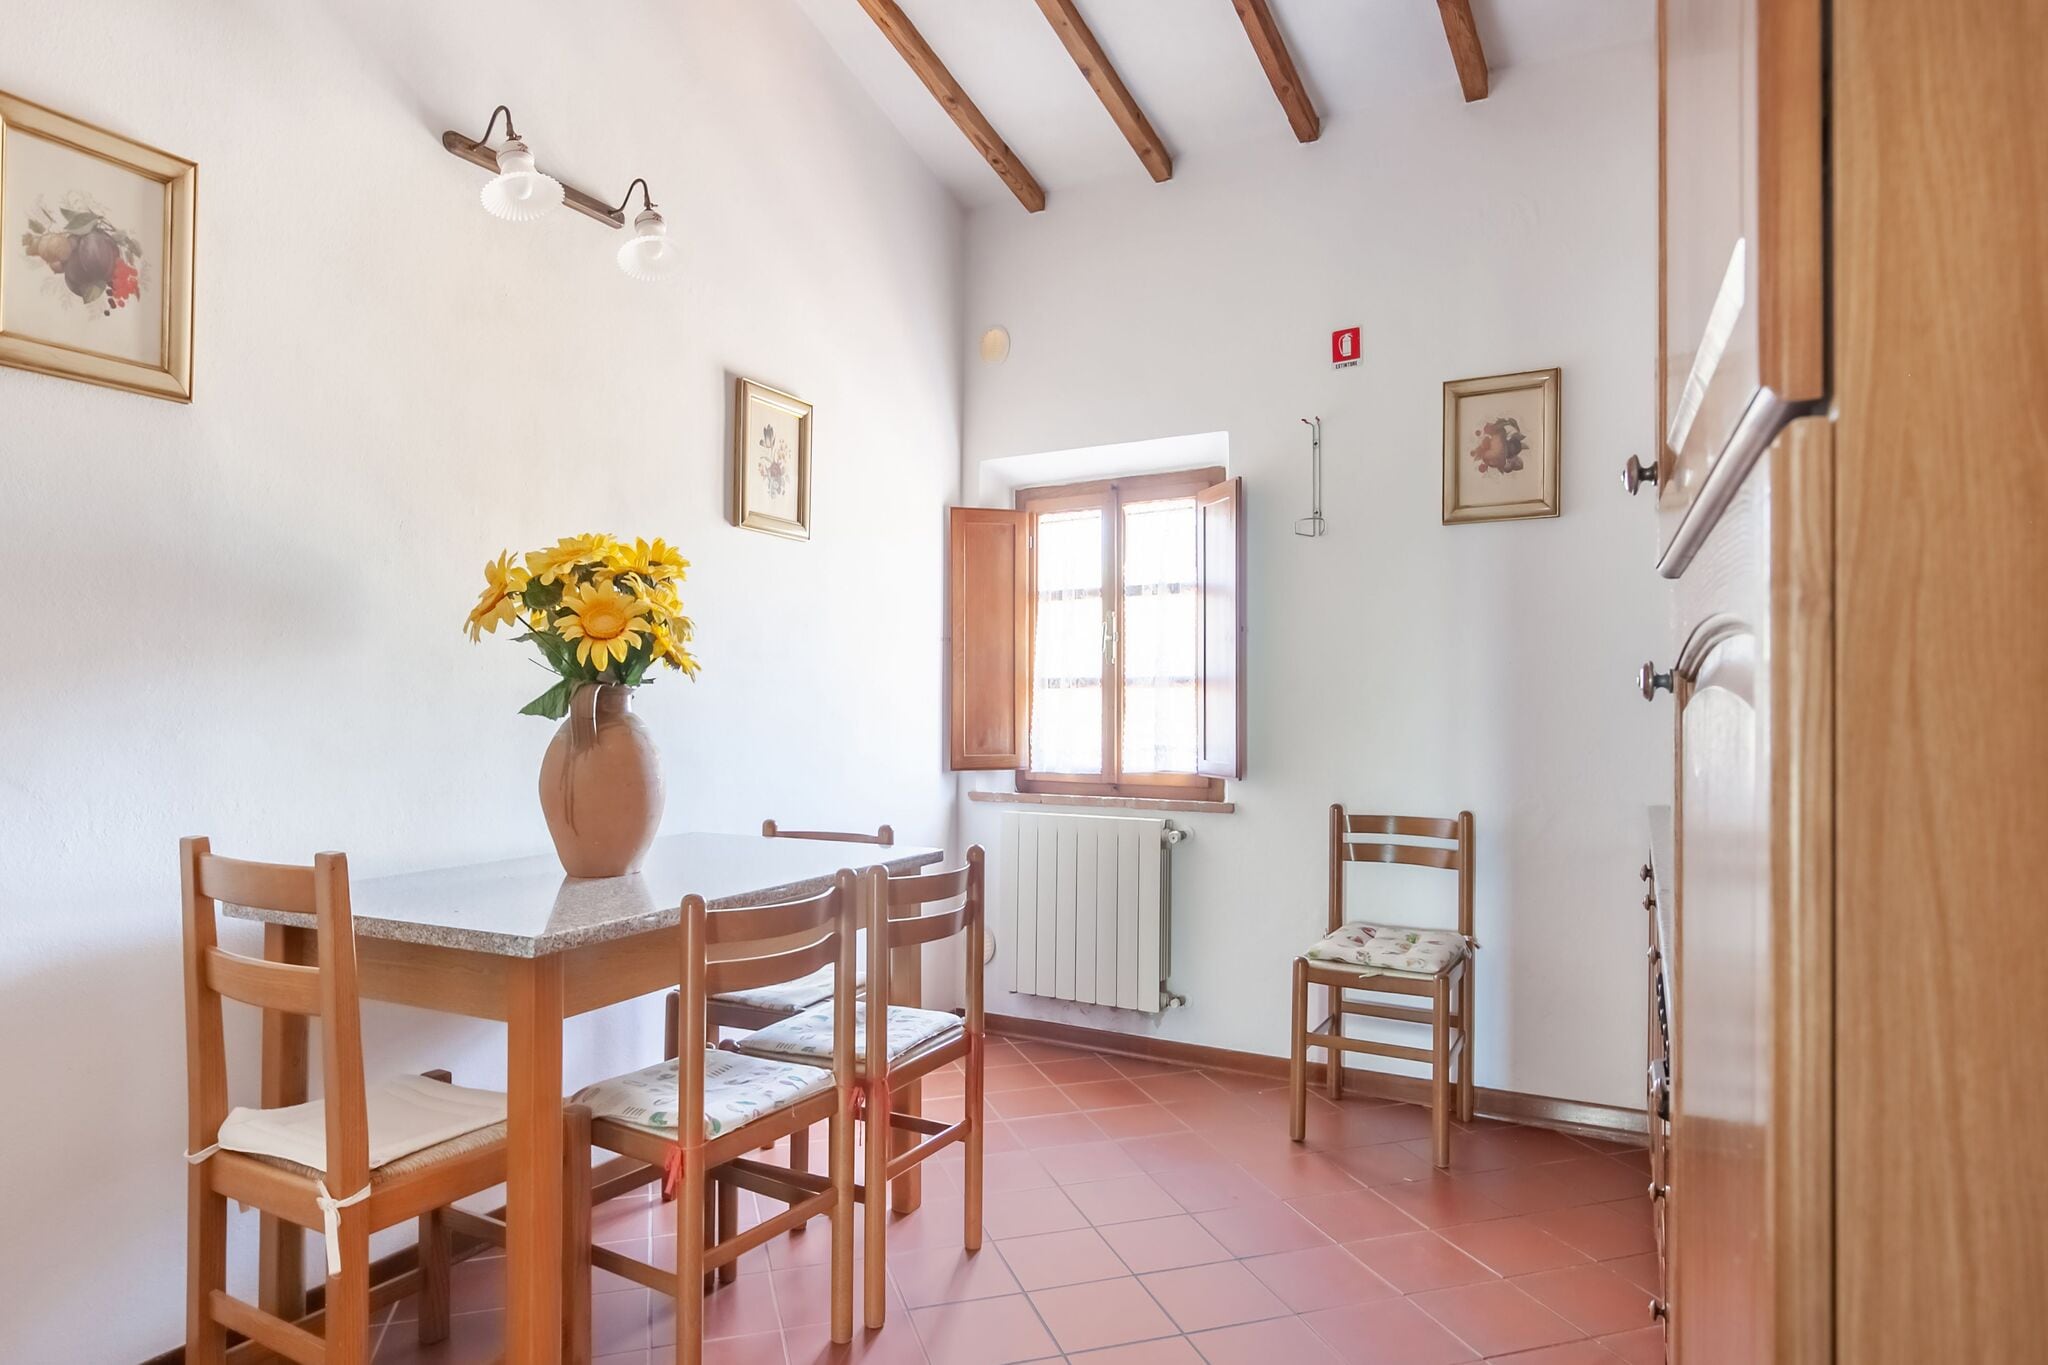 Flat in a typical Tuscan farmhouse with swimming pool